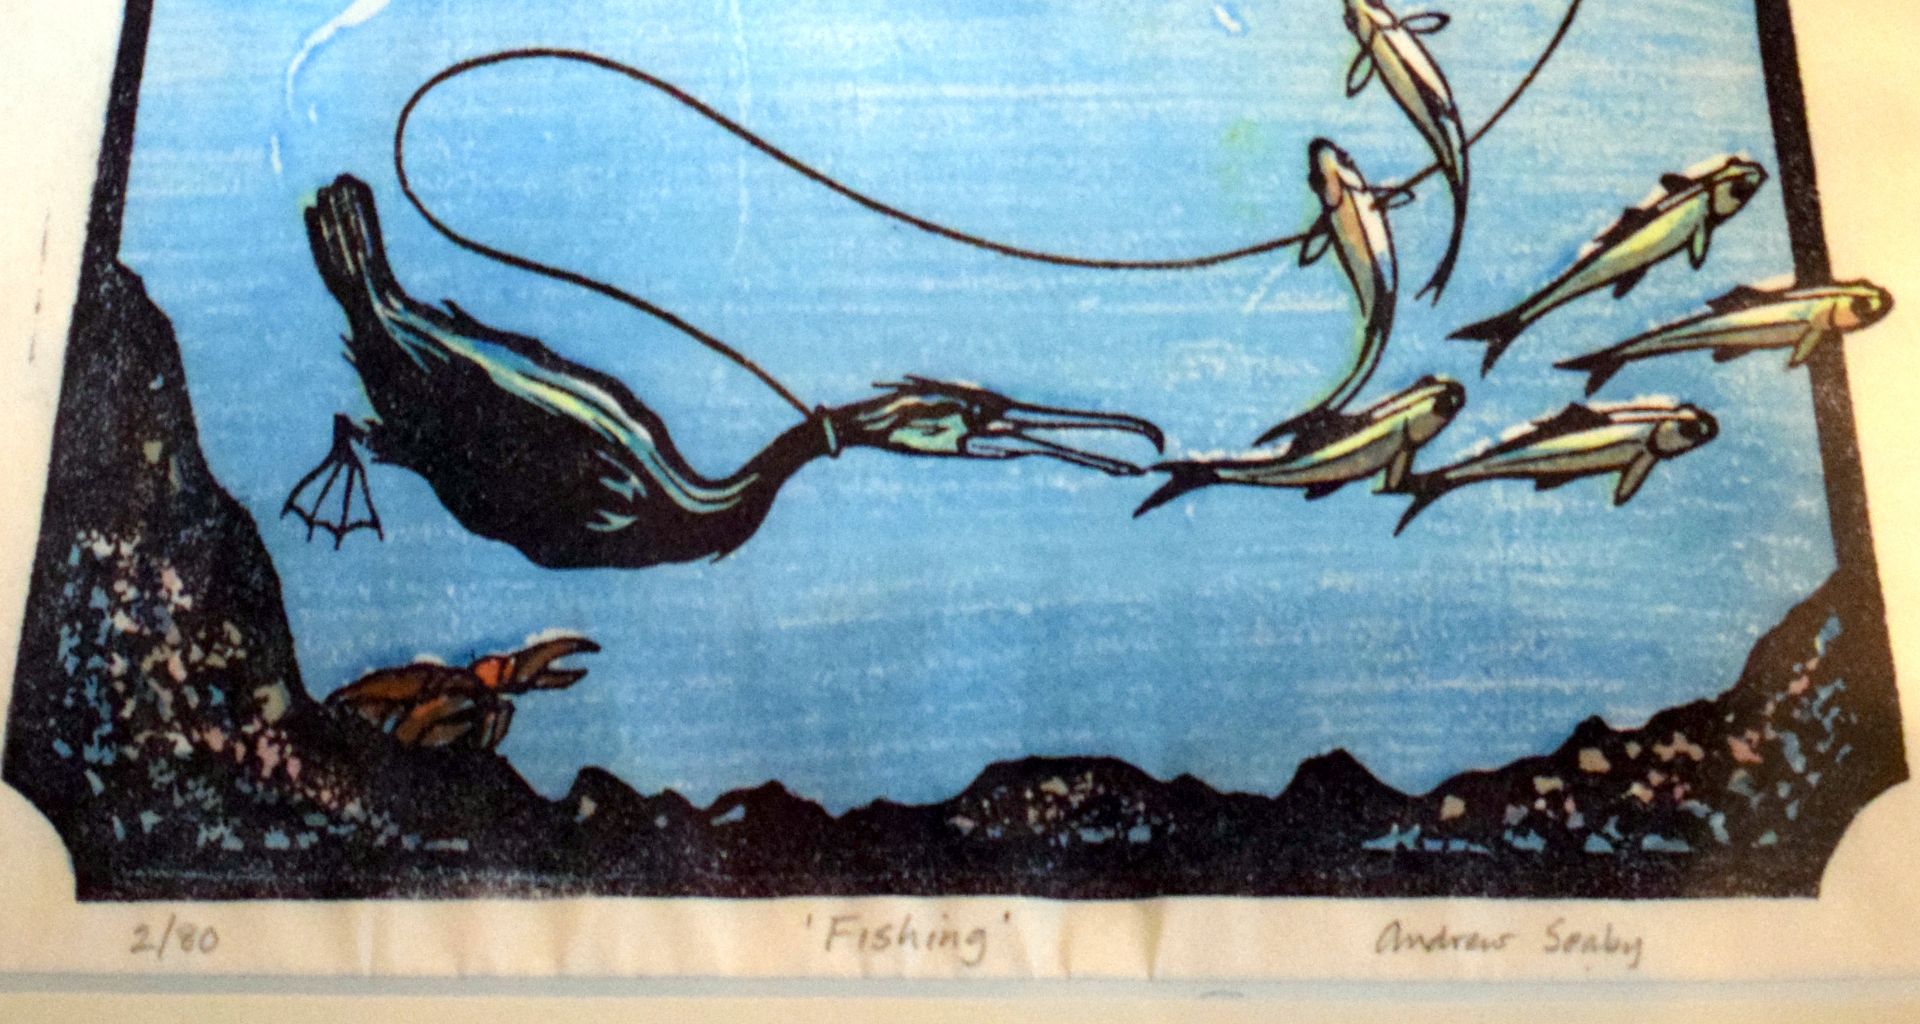 Andrew Seaby Limited Edition Print 'Fishing' - Image 2 of 3